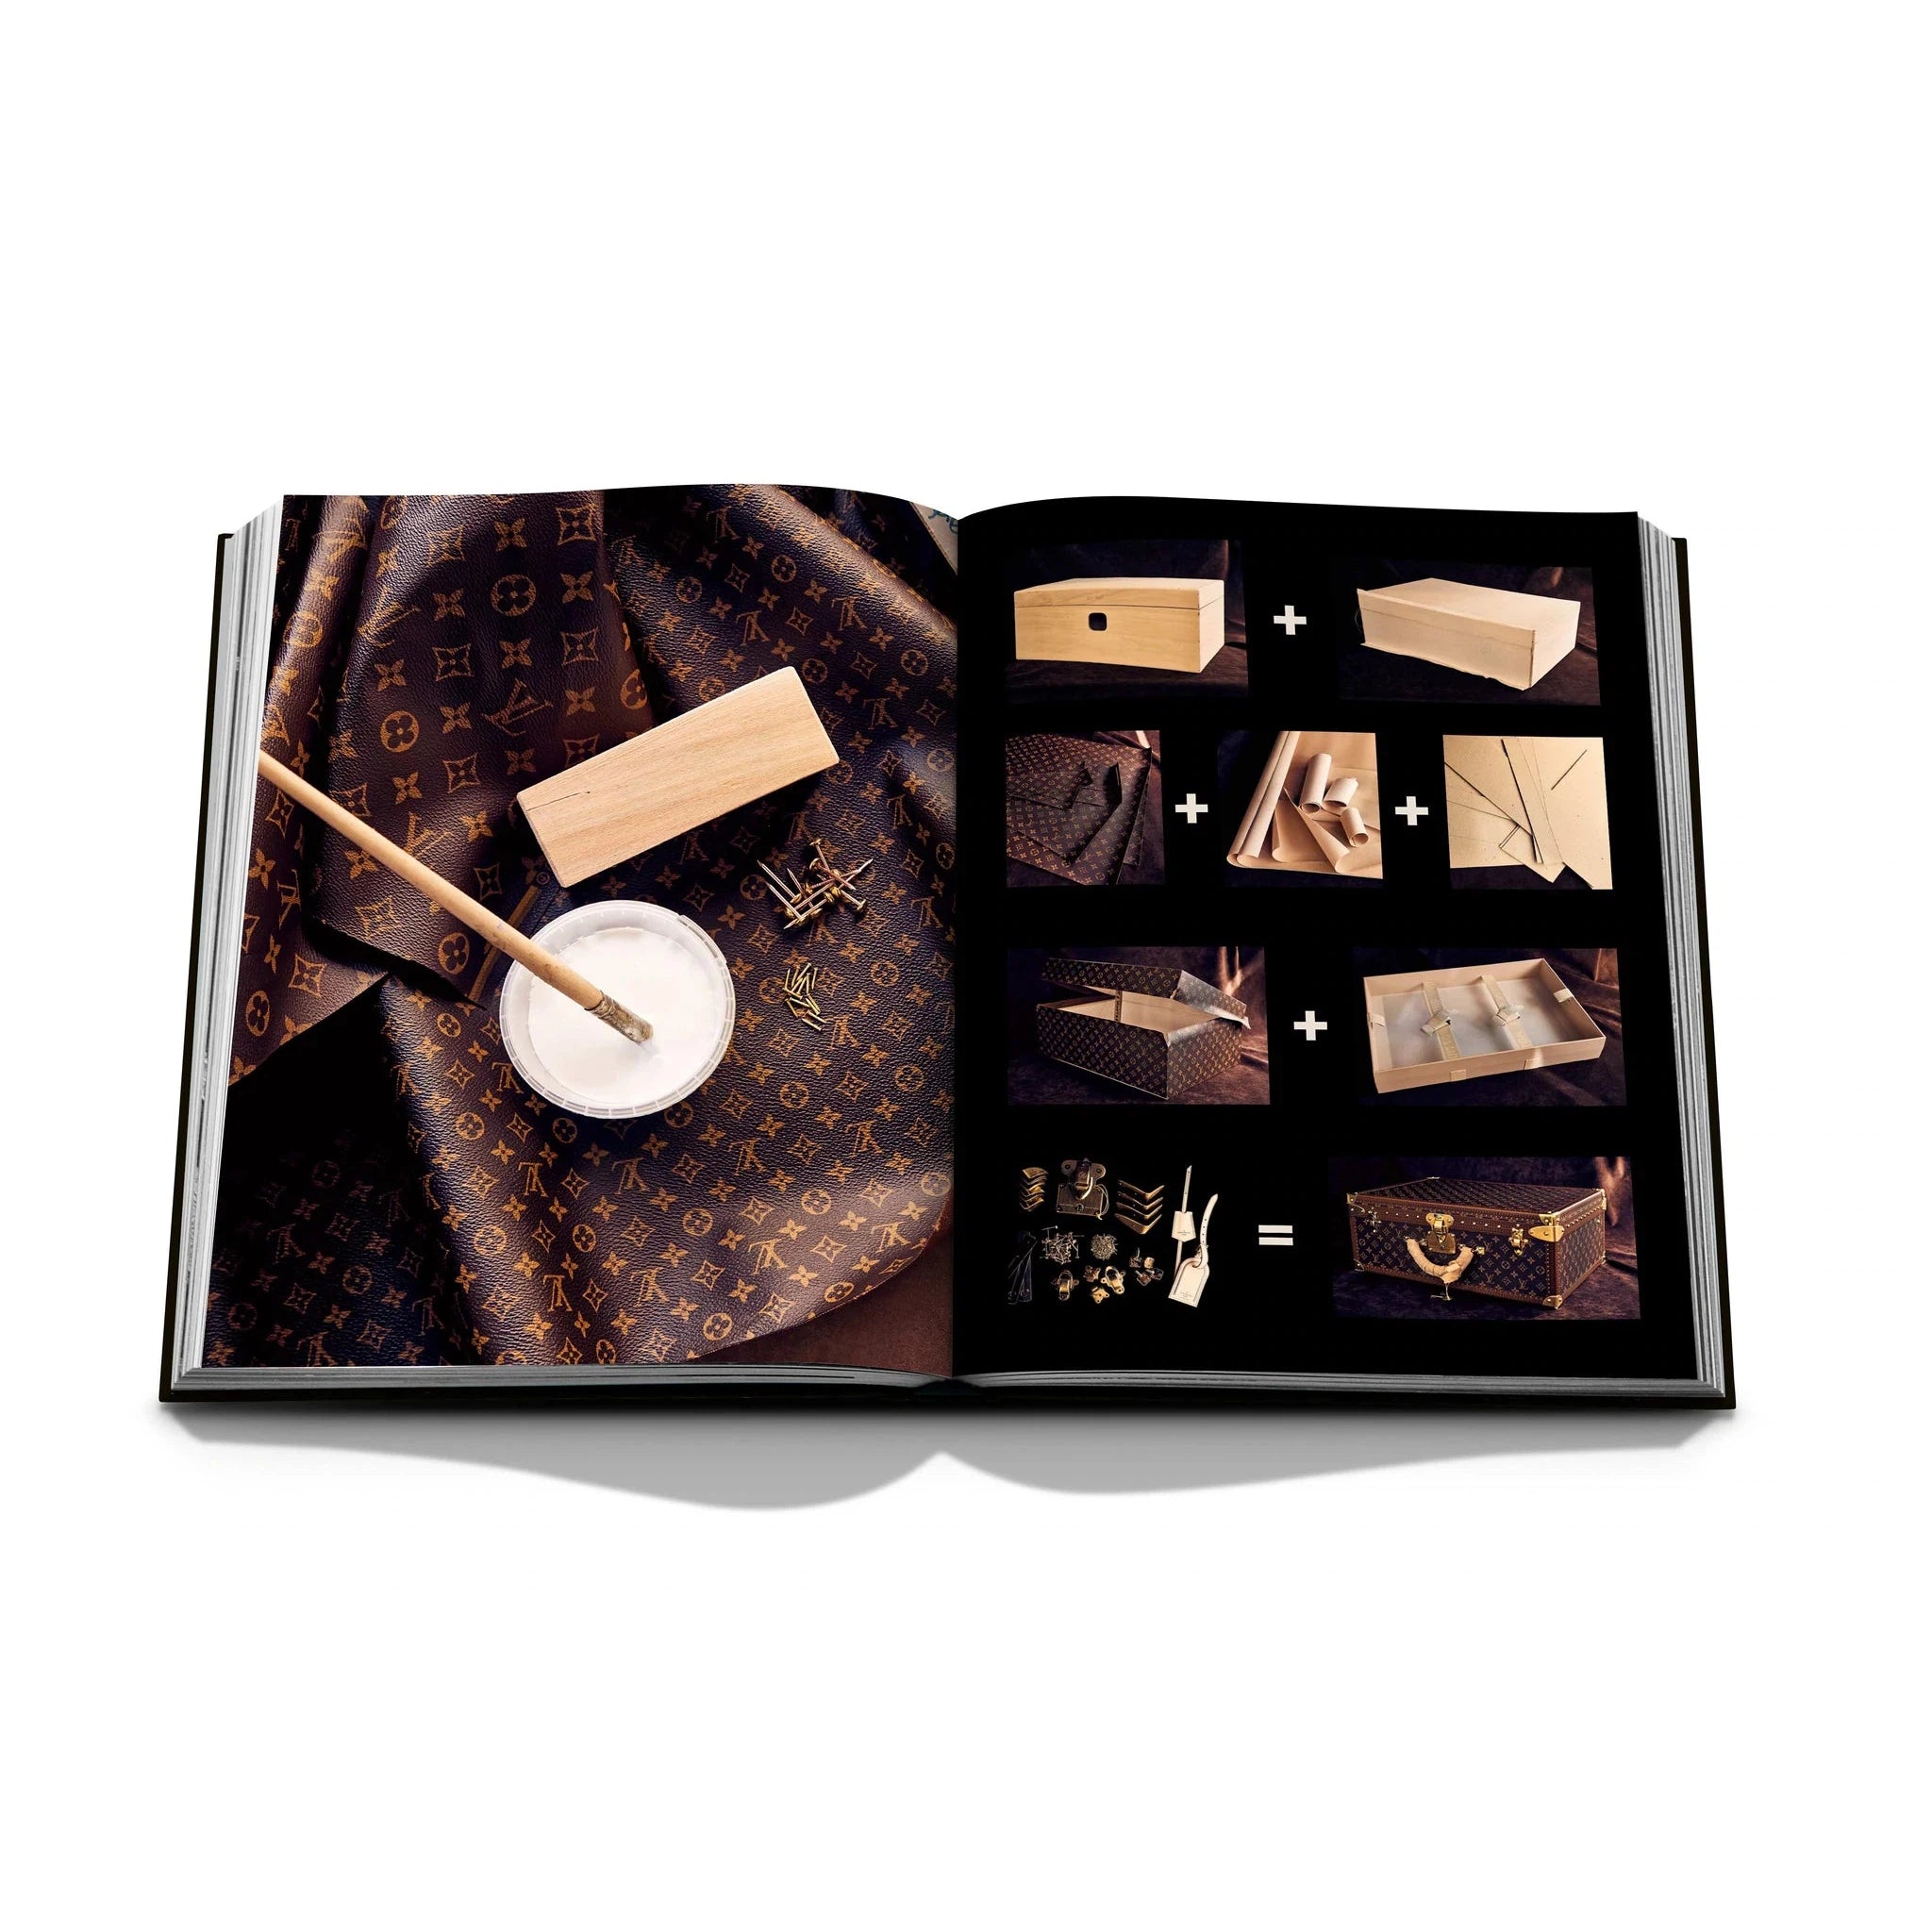 Louis Vuitton's ateliers and artisans are the protagonists of a new book